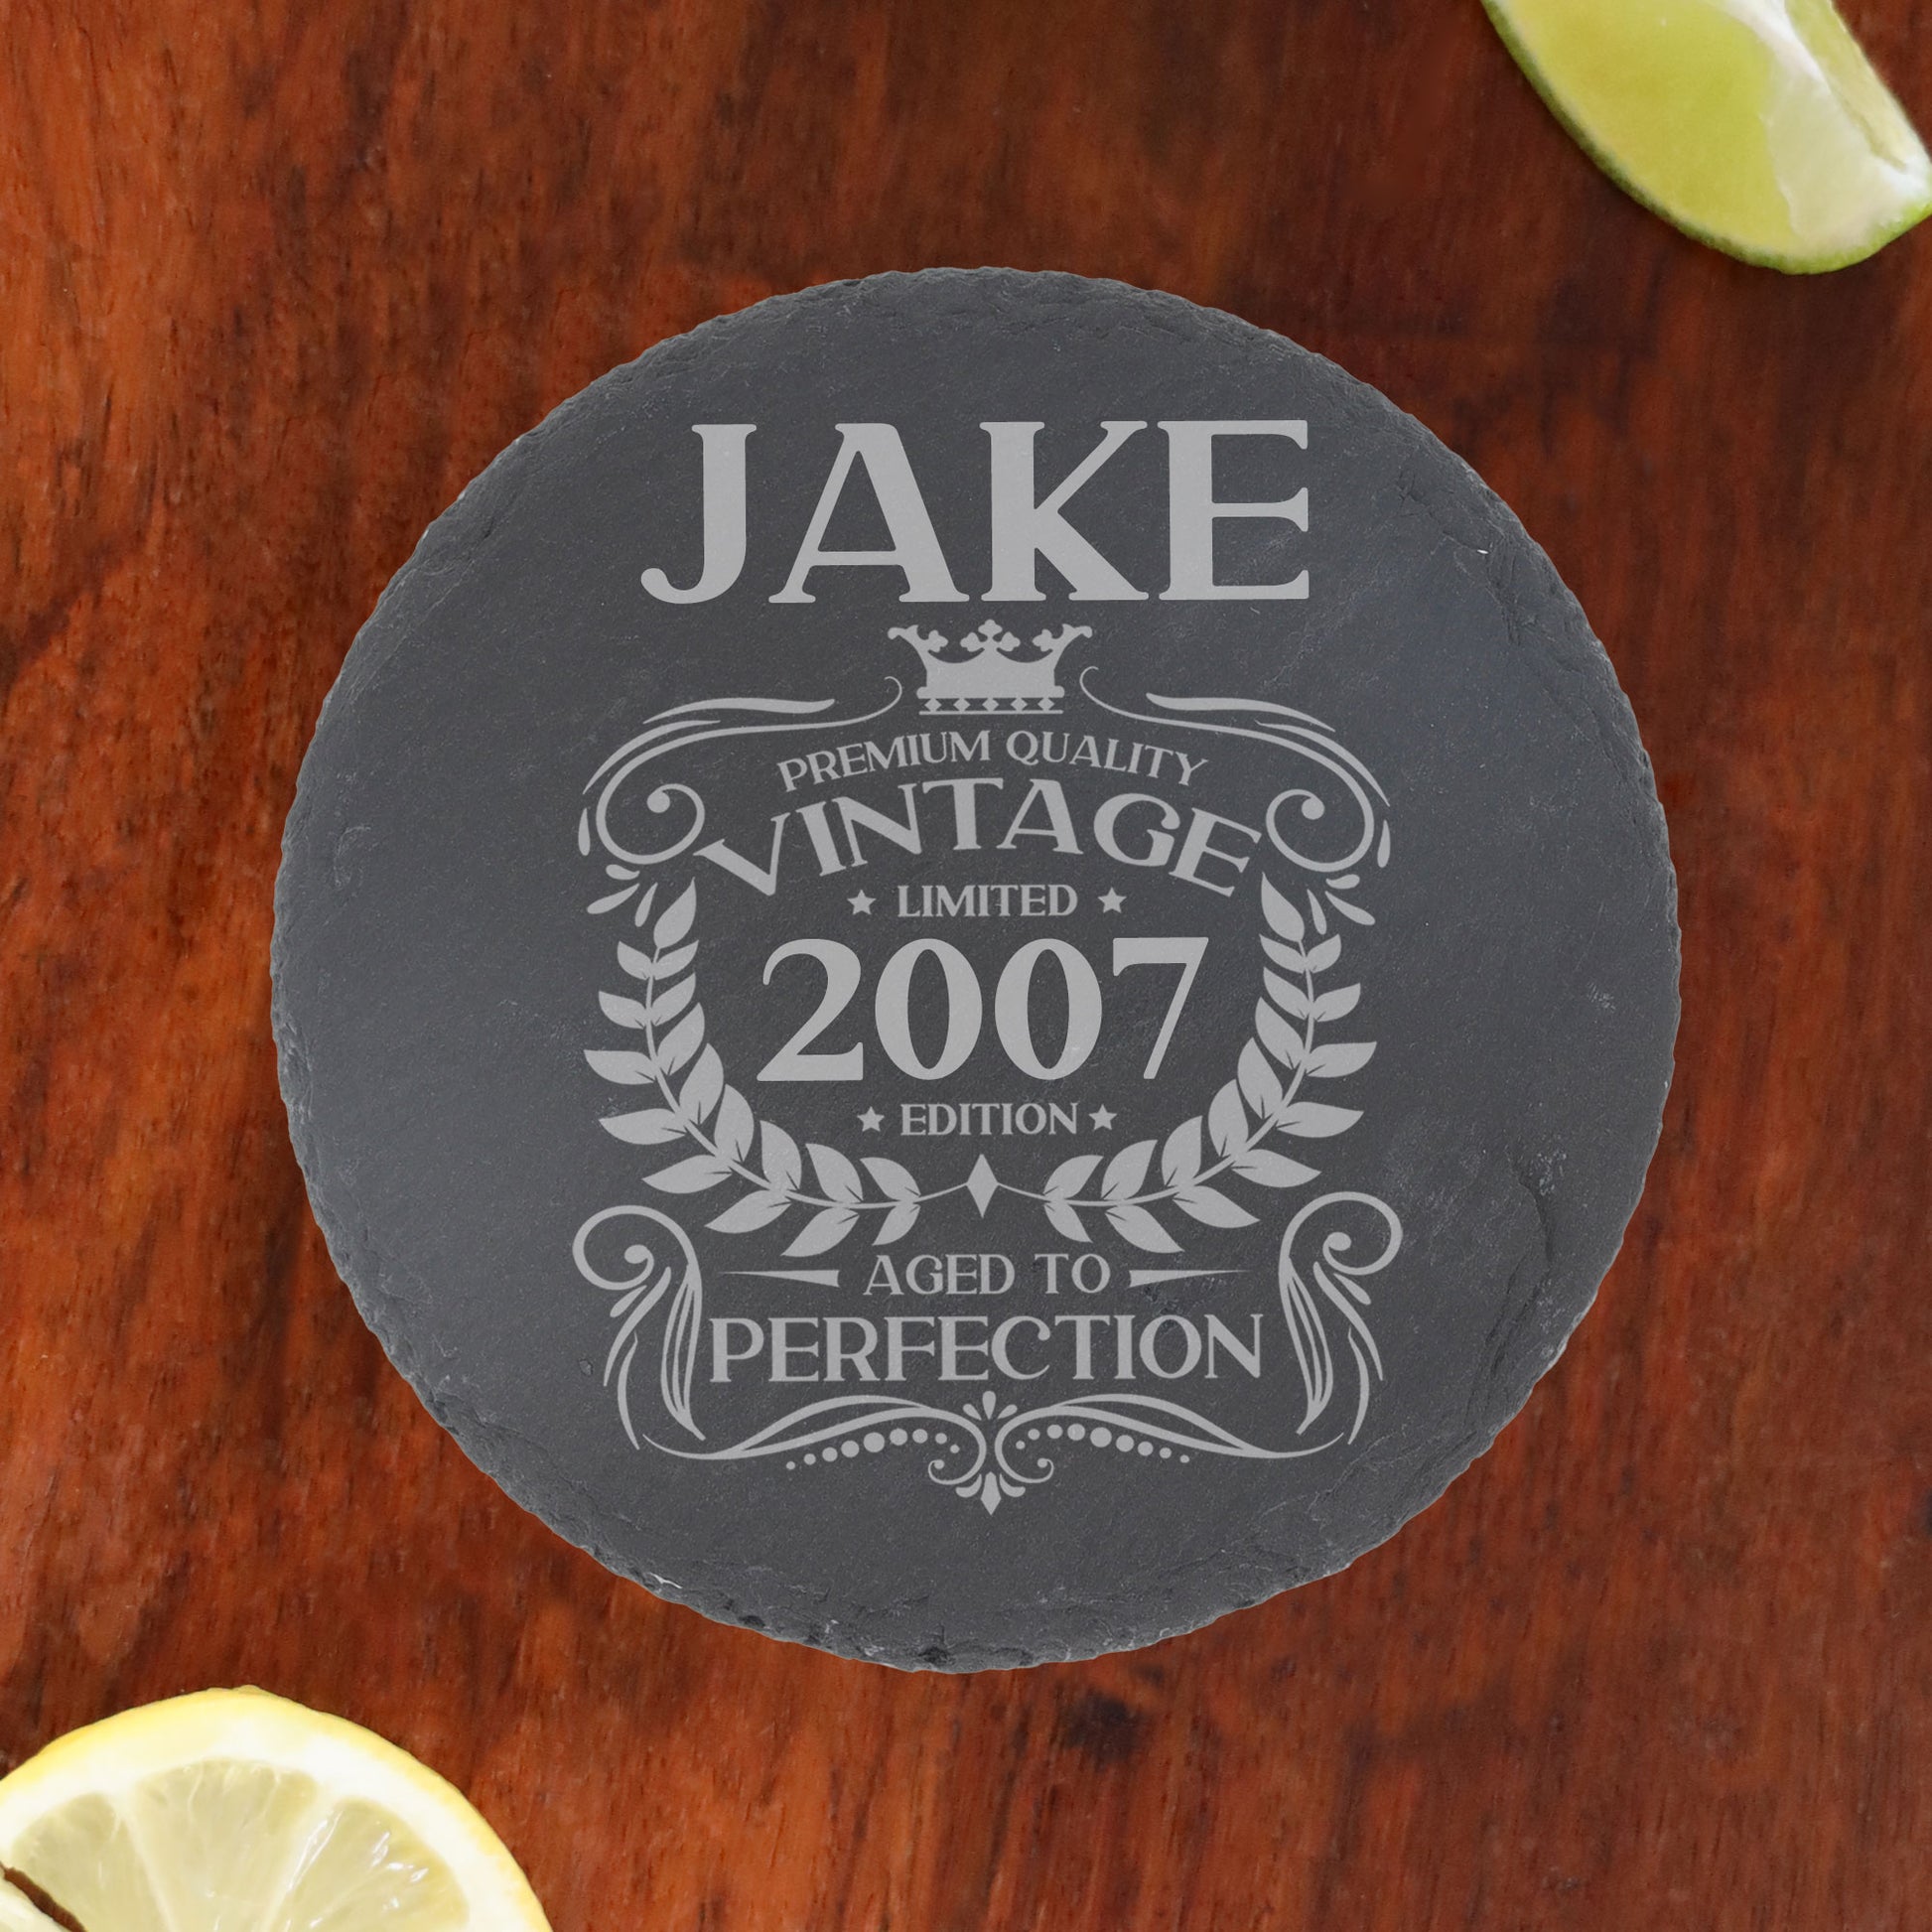 Personalised Vintage 2007 Mug and/or Coaster  - Always Looking Good - Round Coaster On Its Own  